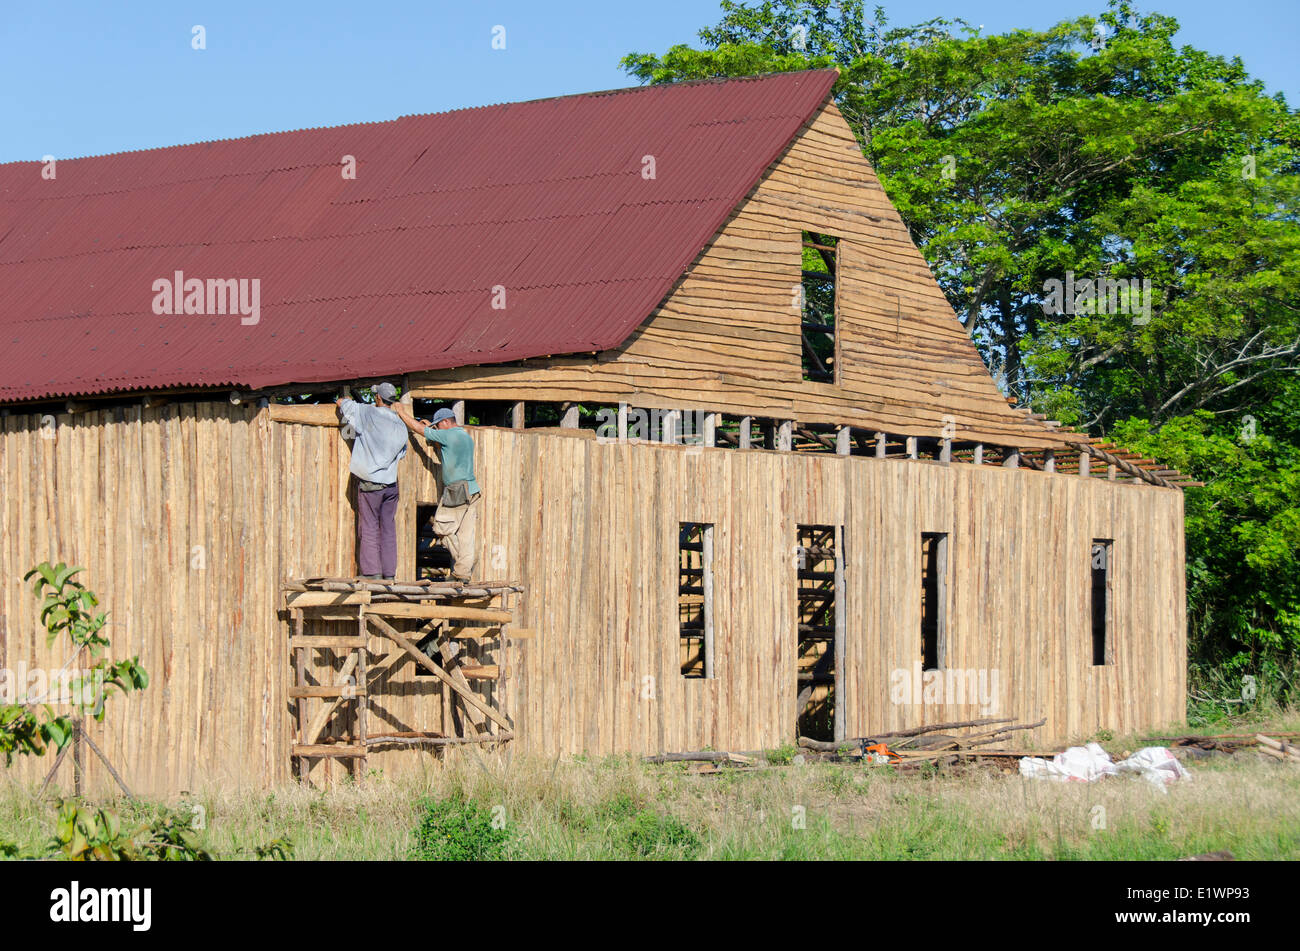 Erecting a tobacco drying shed near Vinales, Cuba Stock Photo